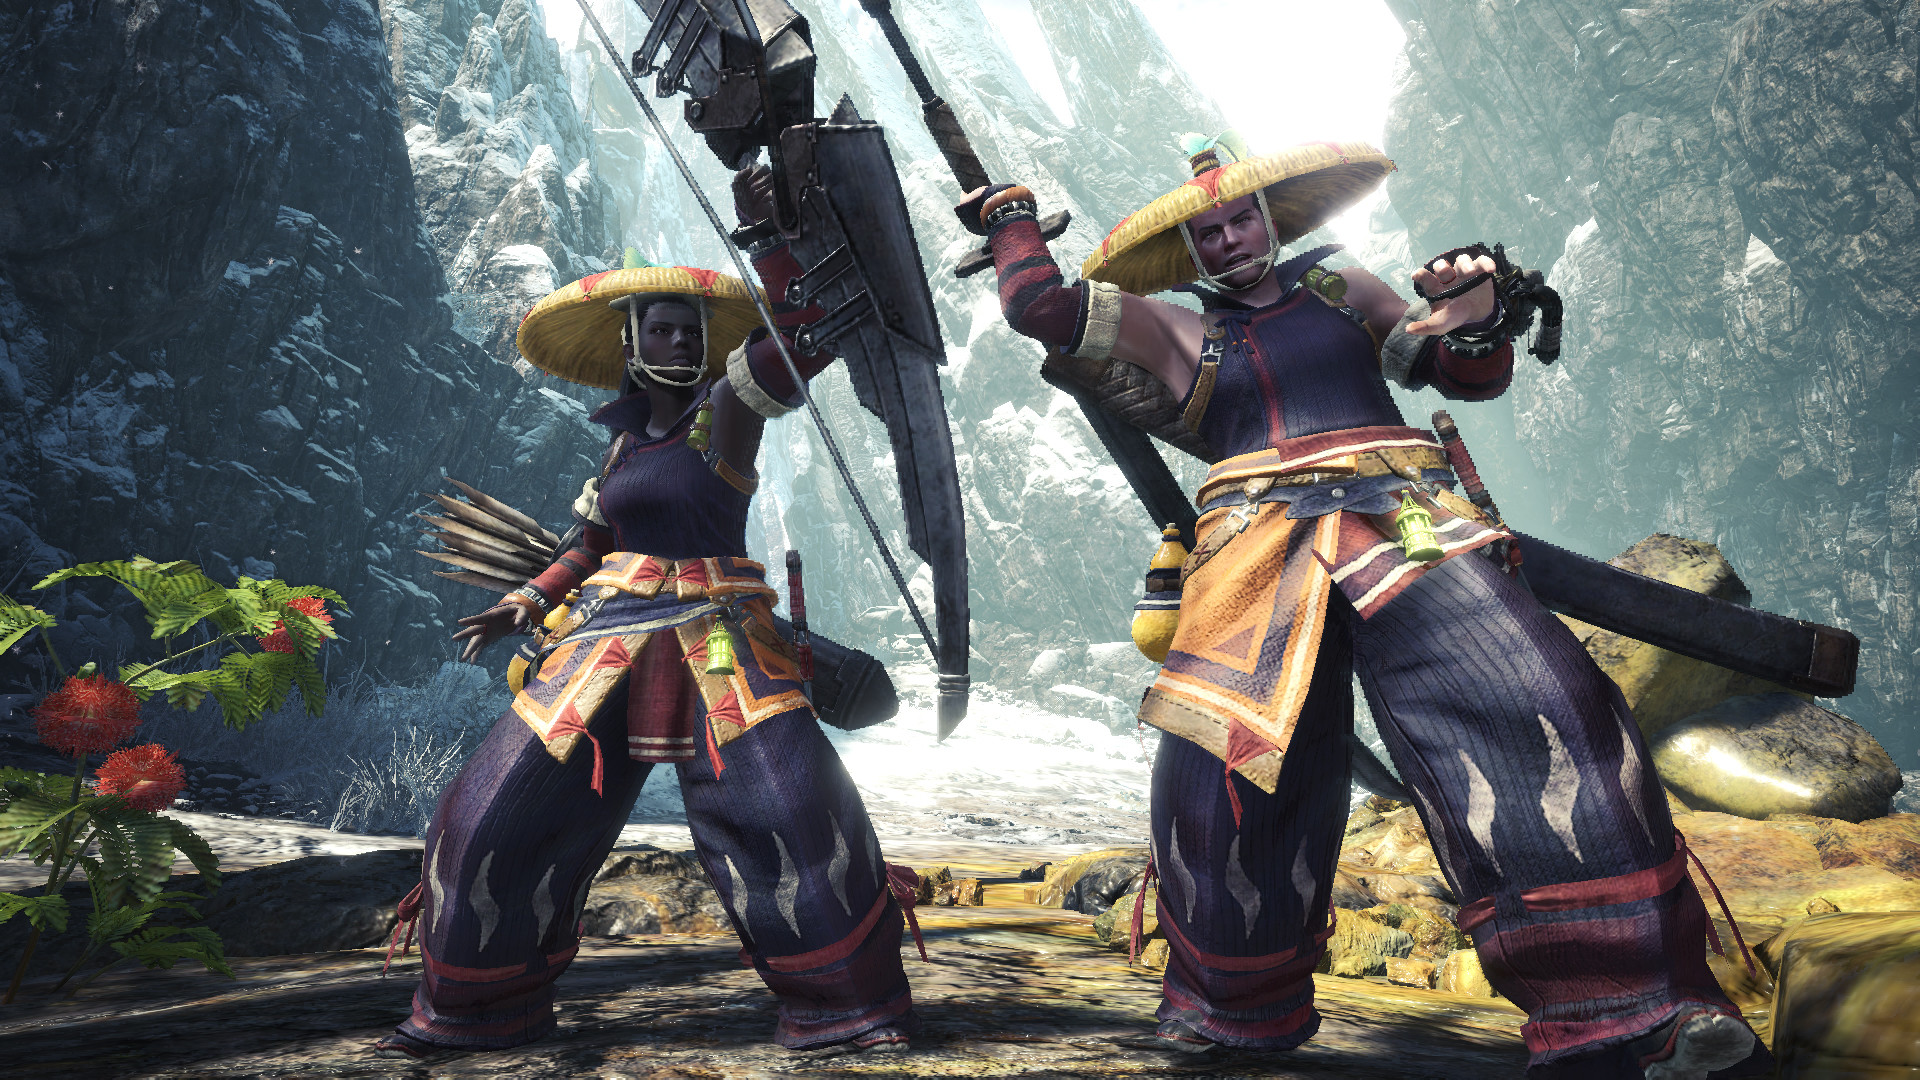 Mhw Yukumo Layered Armor Set Guide How To Get The Layered Armor